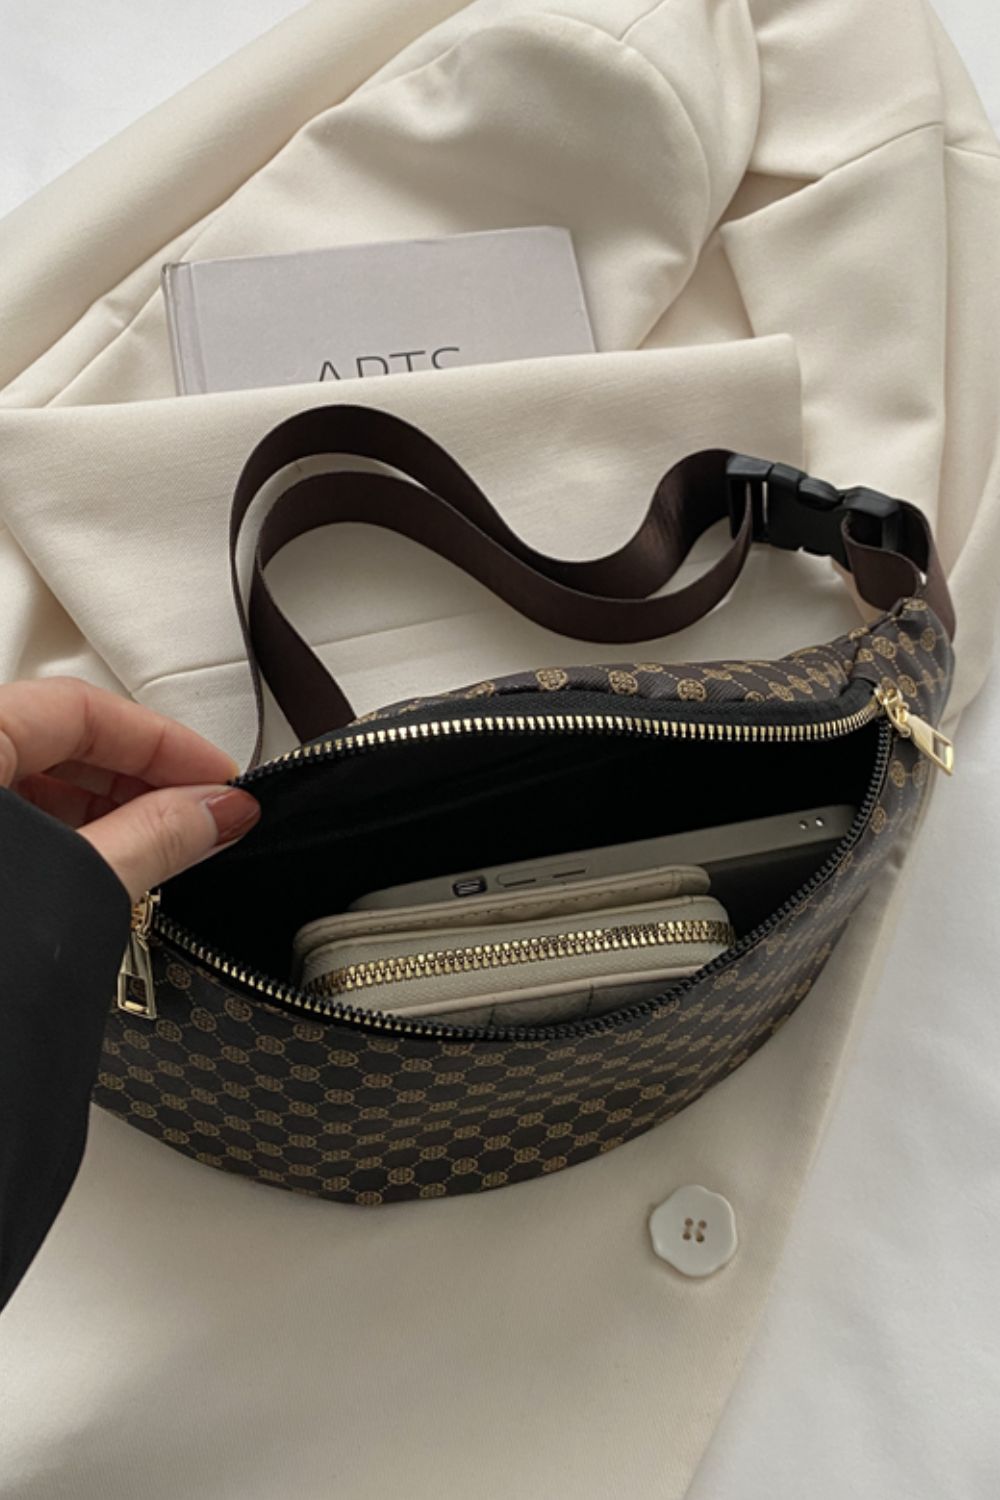 louis vuitton diamier canvas off-white leather brand new shoulder bag for  Sale in Pittsburgh, PA - OfferUp